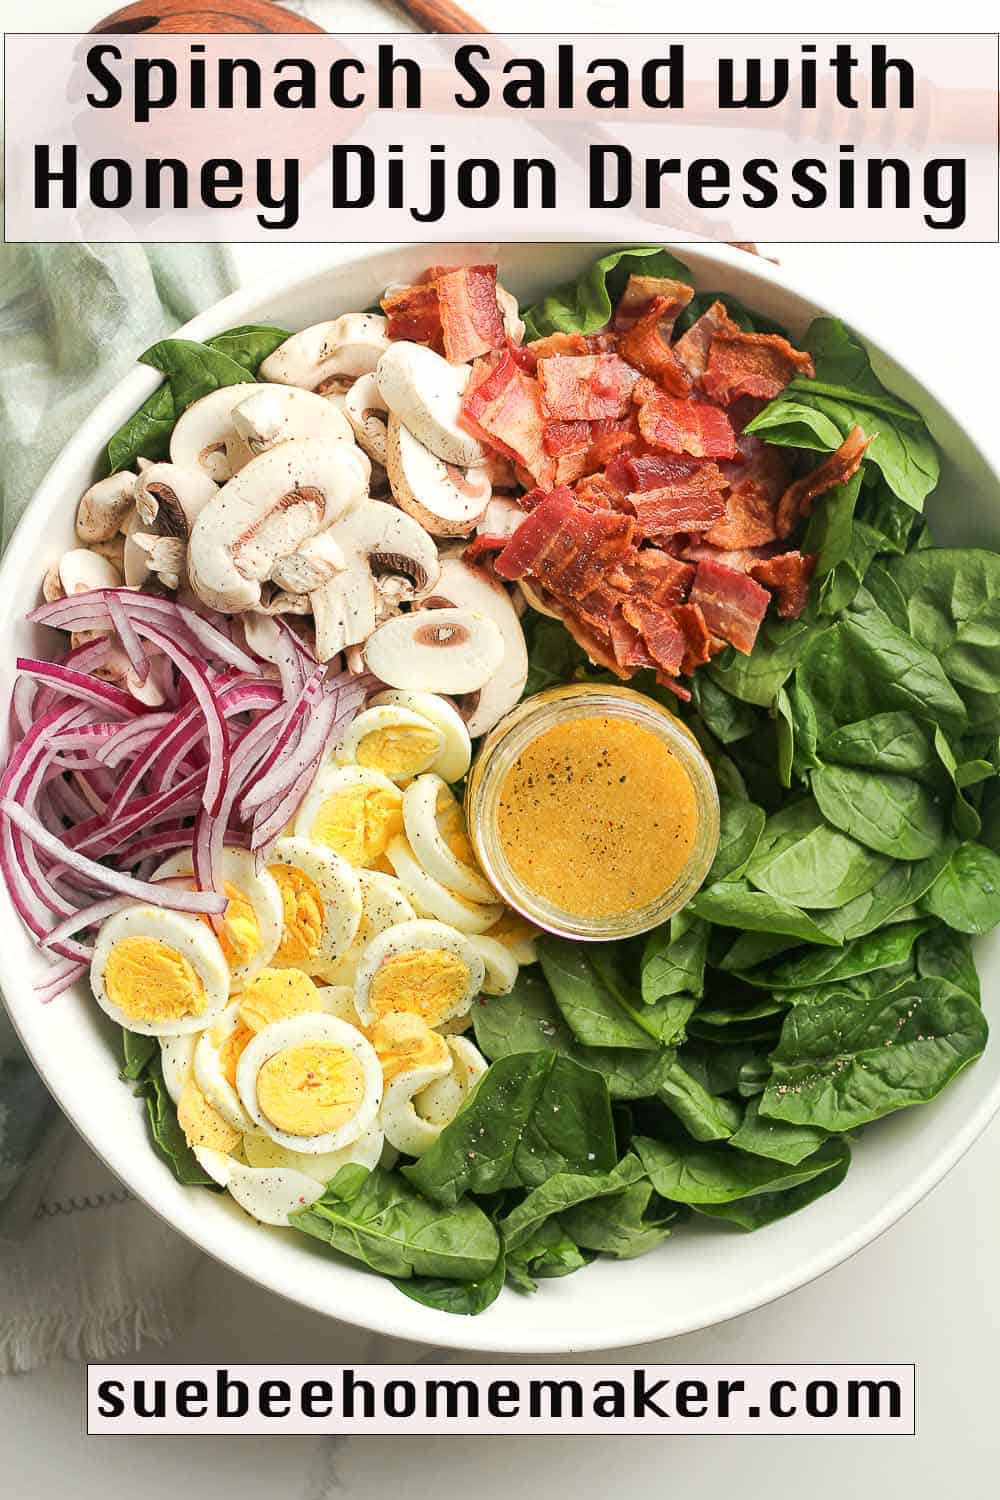 A large bowl of spinach salad by ingredient, with a jar of Honey Dijon Dressing.